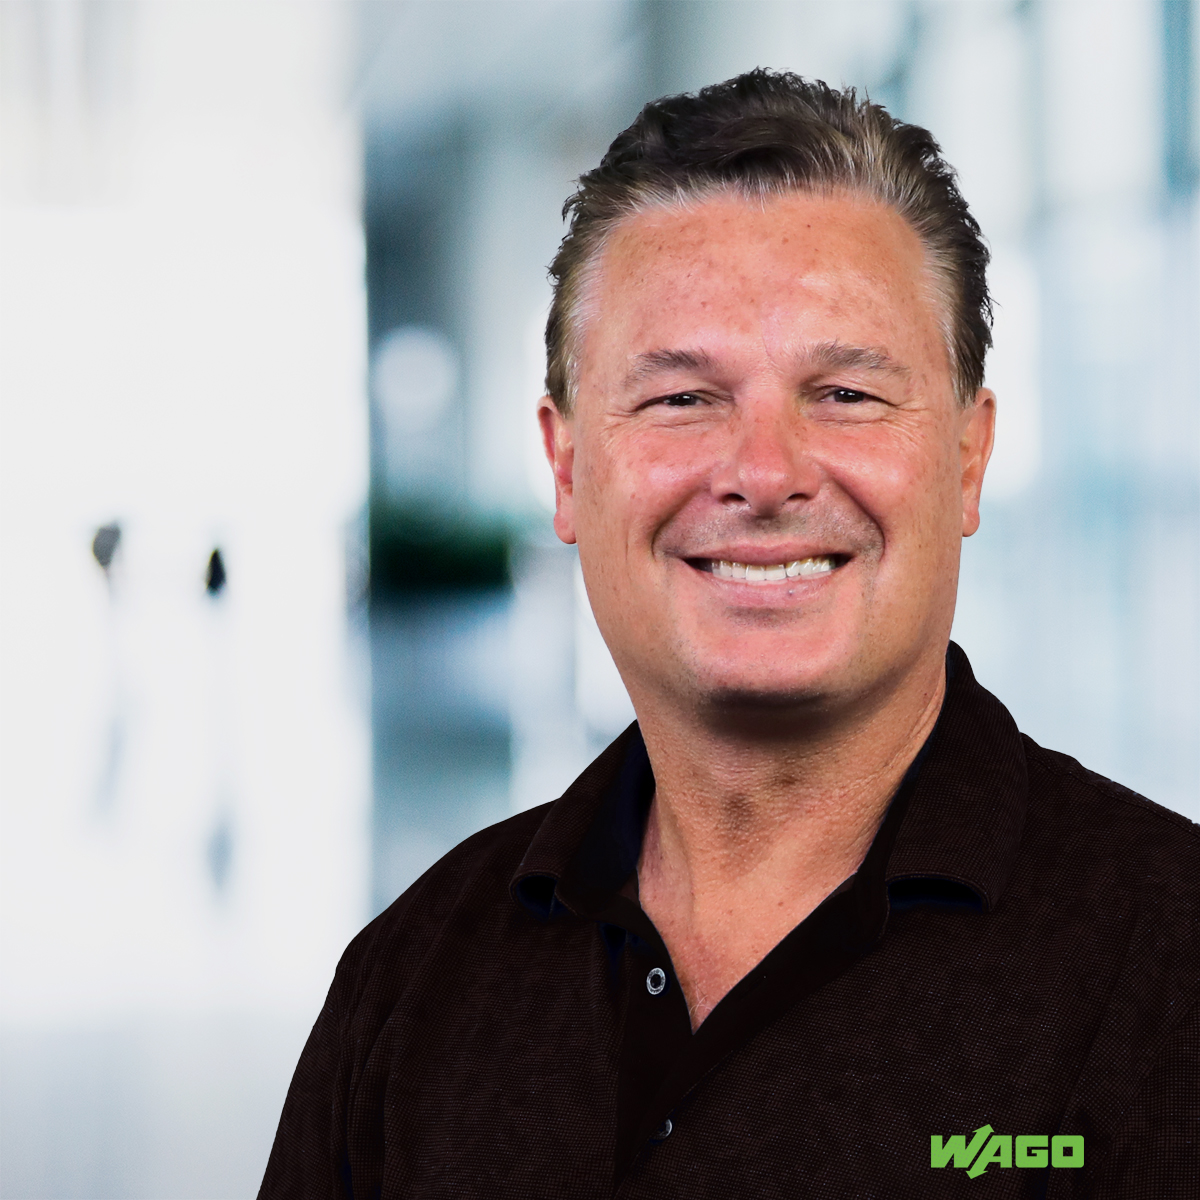 WAGO has recently named Marcus Vuk as its new Regional Sales Manager